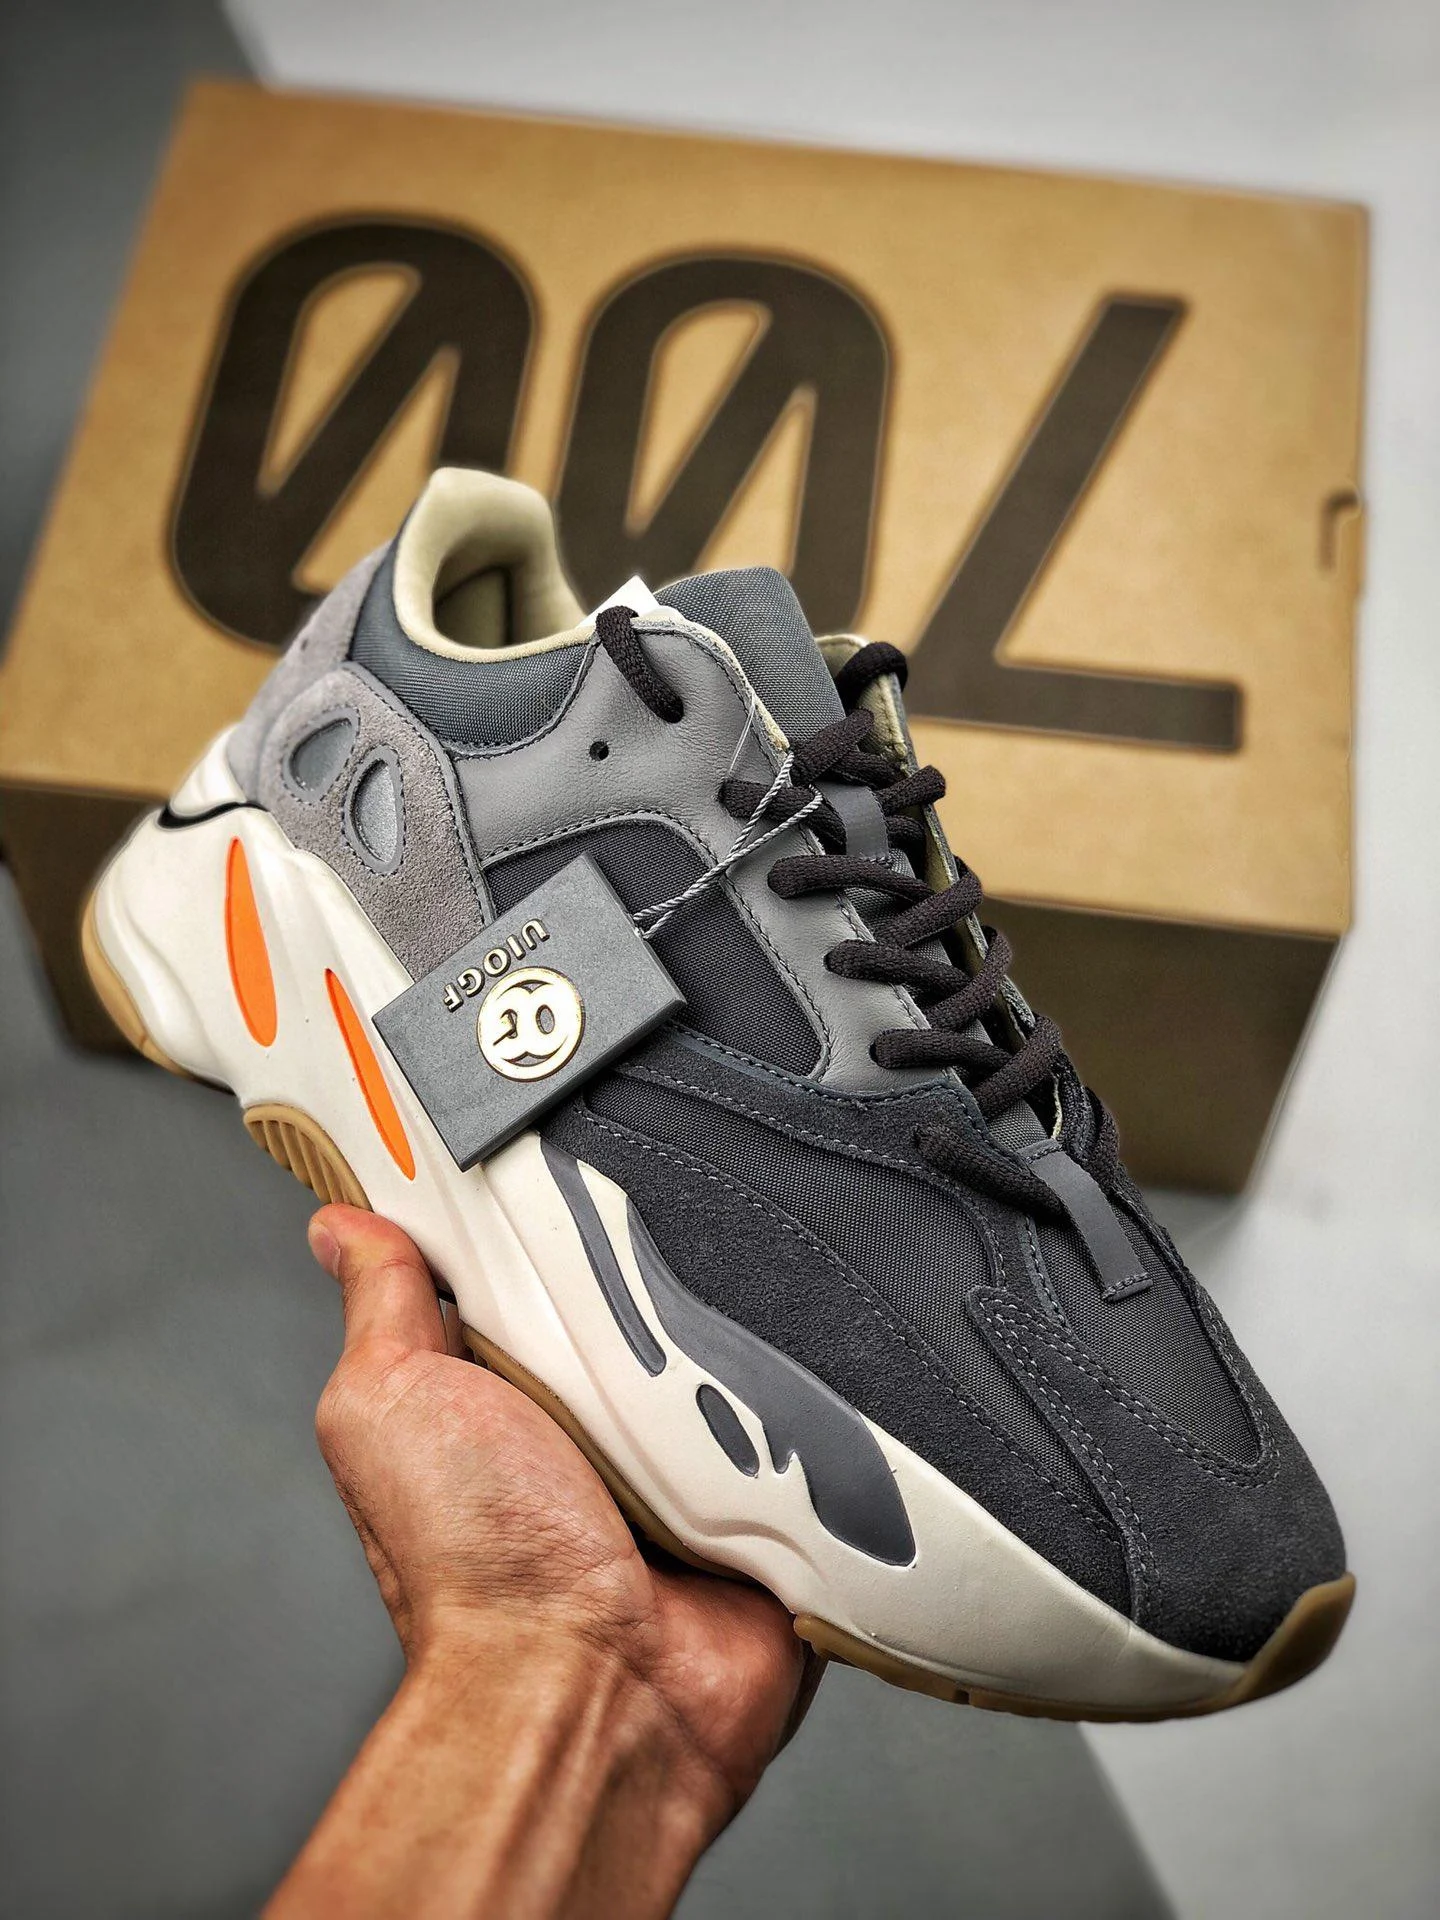 Adidas Yeezy Boost 700 Magnet FV9922 For Sale